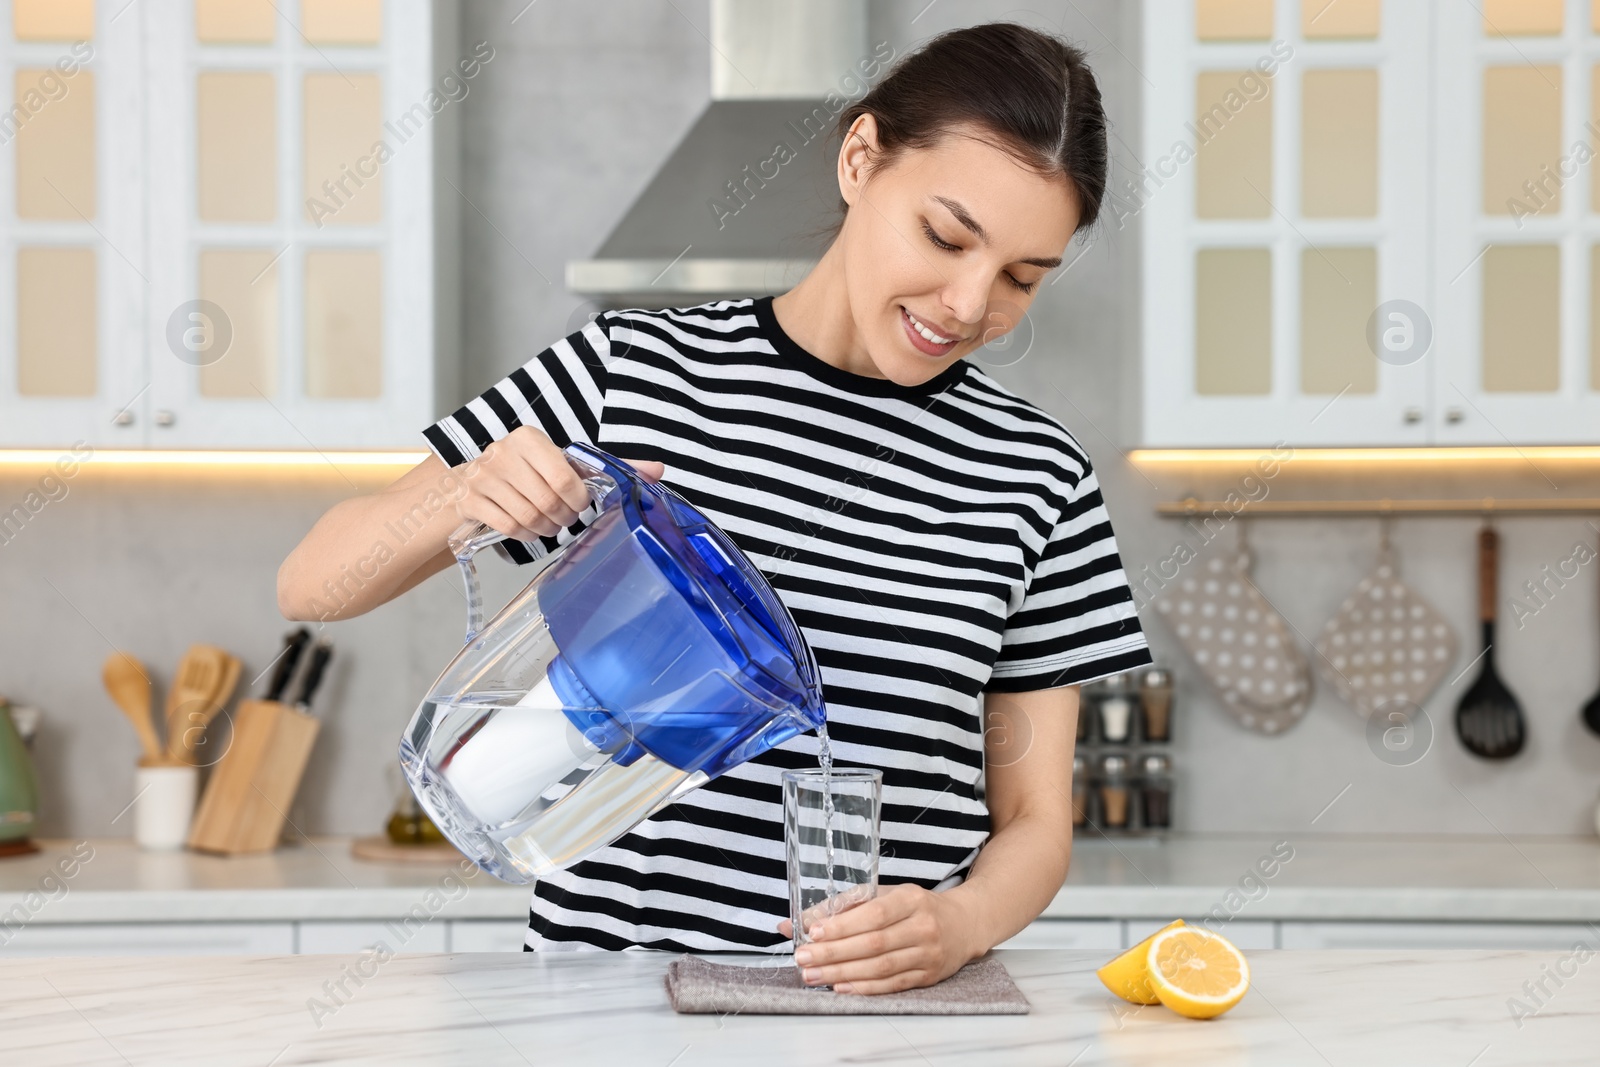 Photo of Woman pouring water from filter jug into glass in kitchen